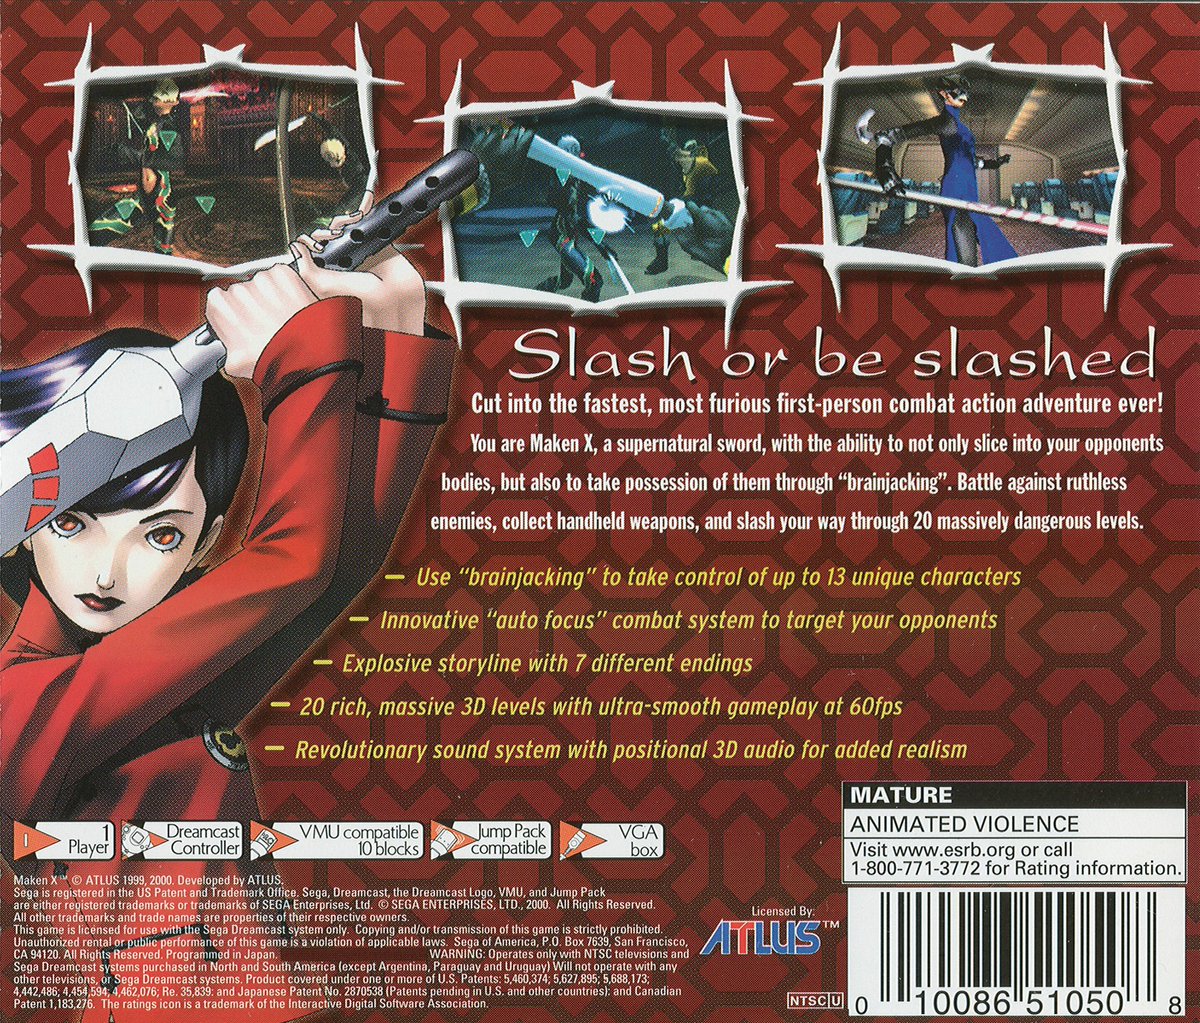 MAKEN X: In 1999 a supernatural sword bonded to Kay Sagami. An excellent first person Sega Dreamcast hack & slash game from Atlus this later got a PlayStation 2 remake, did you ever Brainjack other characters? Which ending did you get? #retrogaming #Sega #Dreamcast #90s #gaming